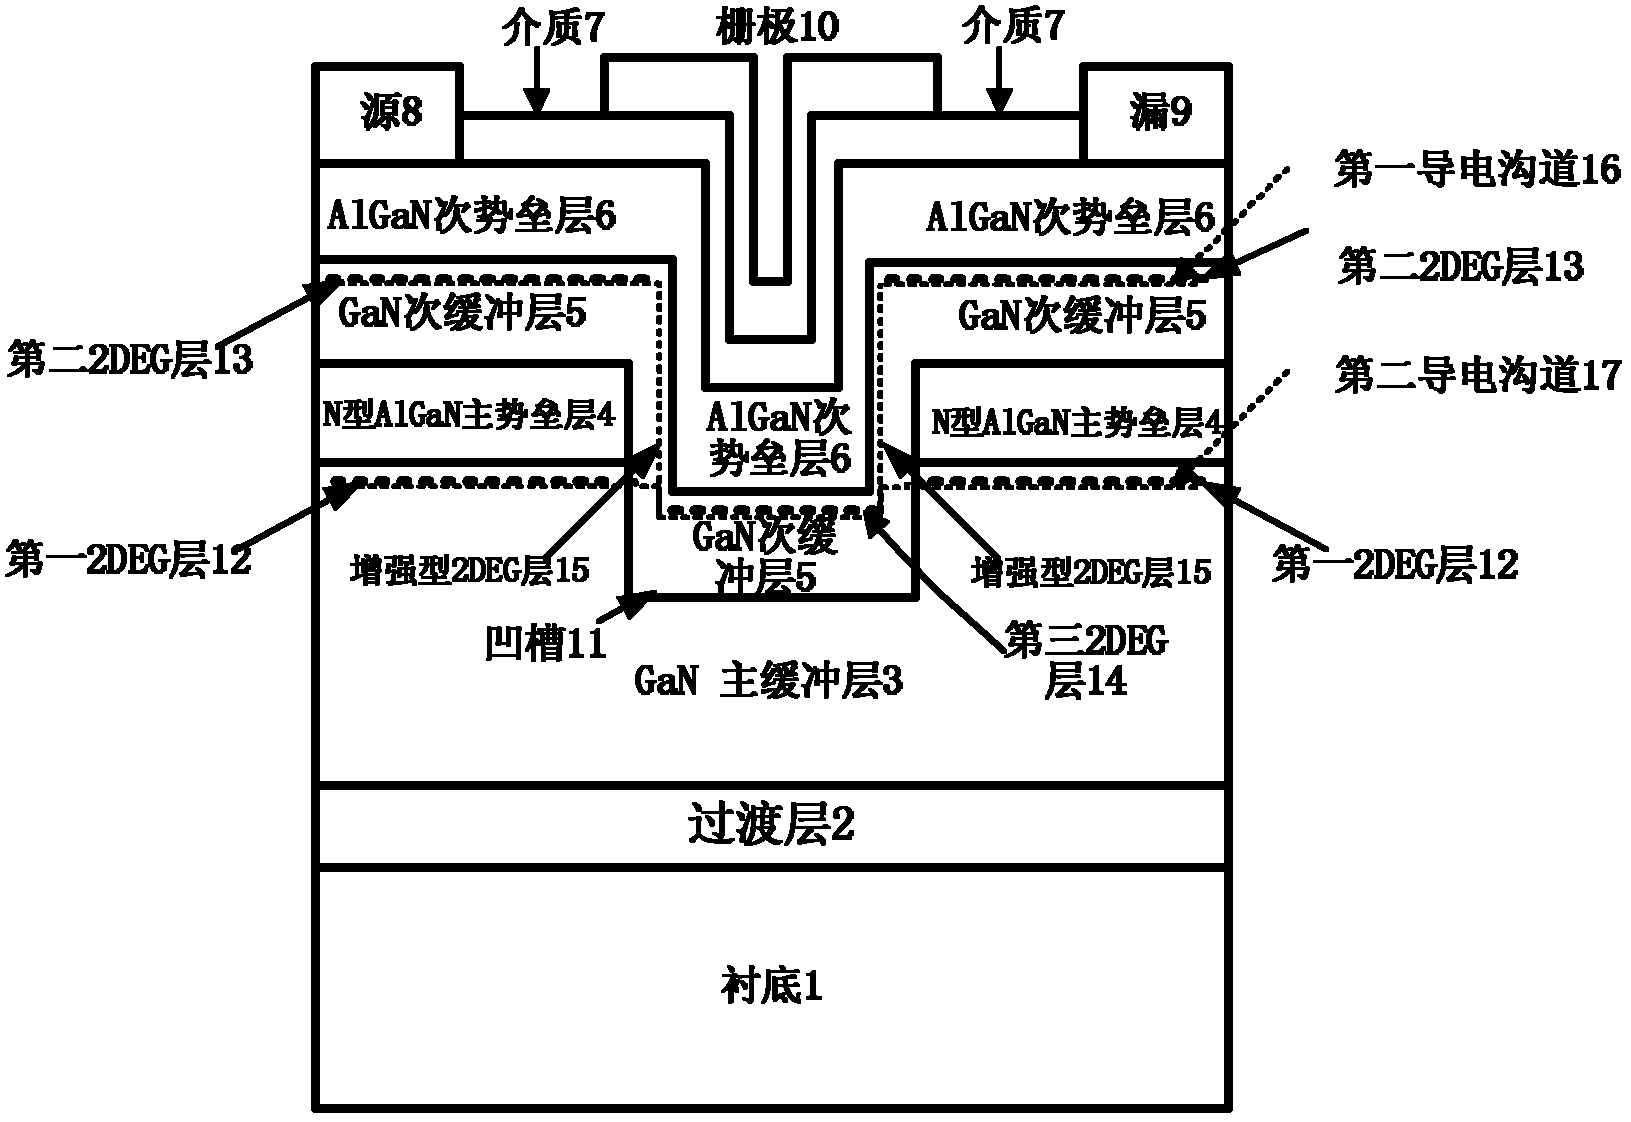 Metal-insulator-semiconductor (MIS) grid enhanced high electron mobility transistor (HEMT) device based on gallium nitride (GaN) and manufacture method of MIS grid enhanced HEMT device